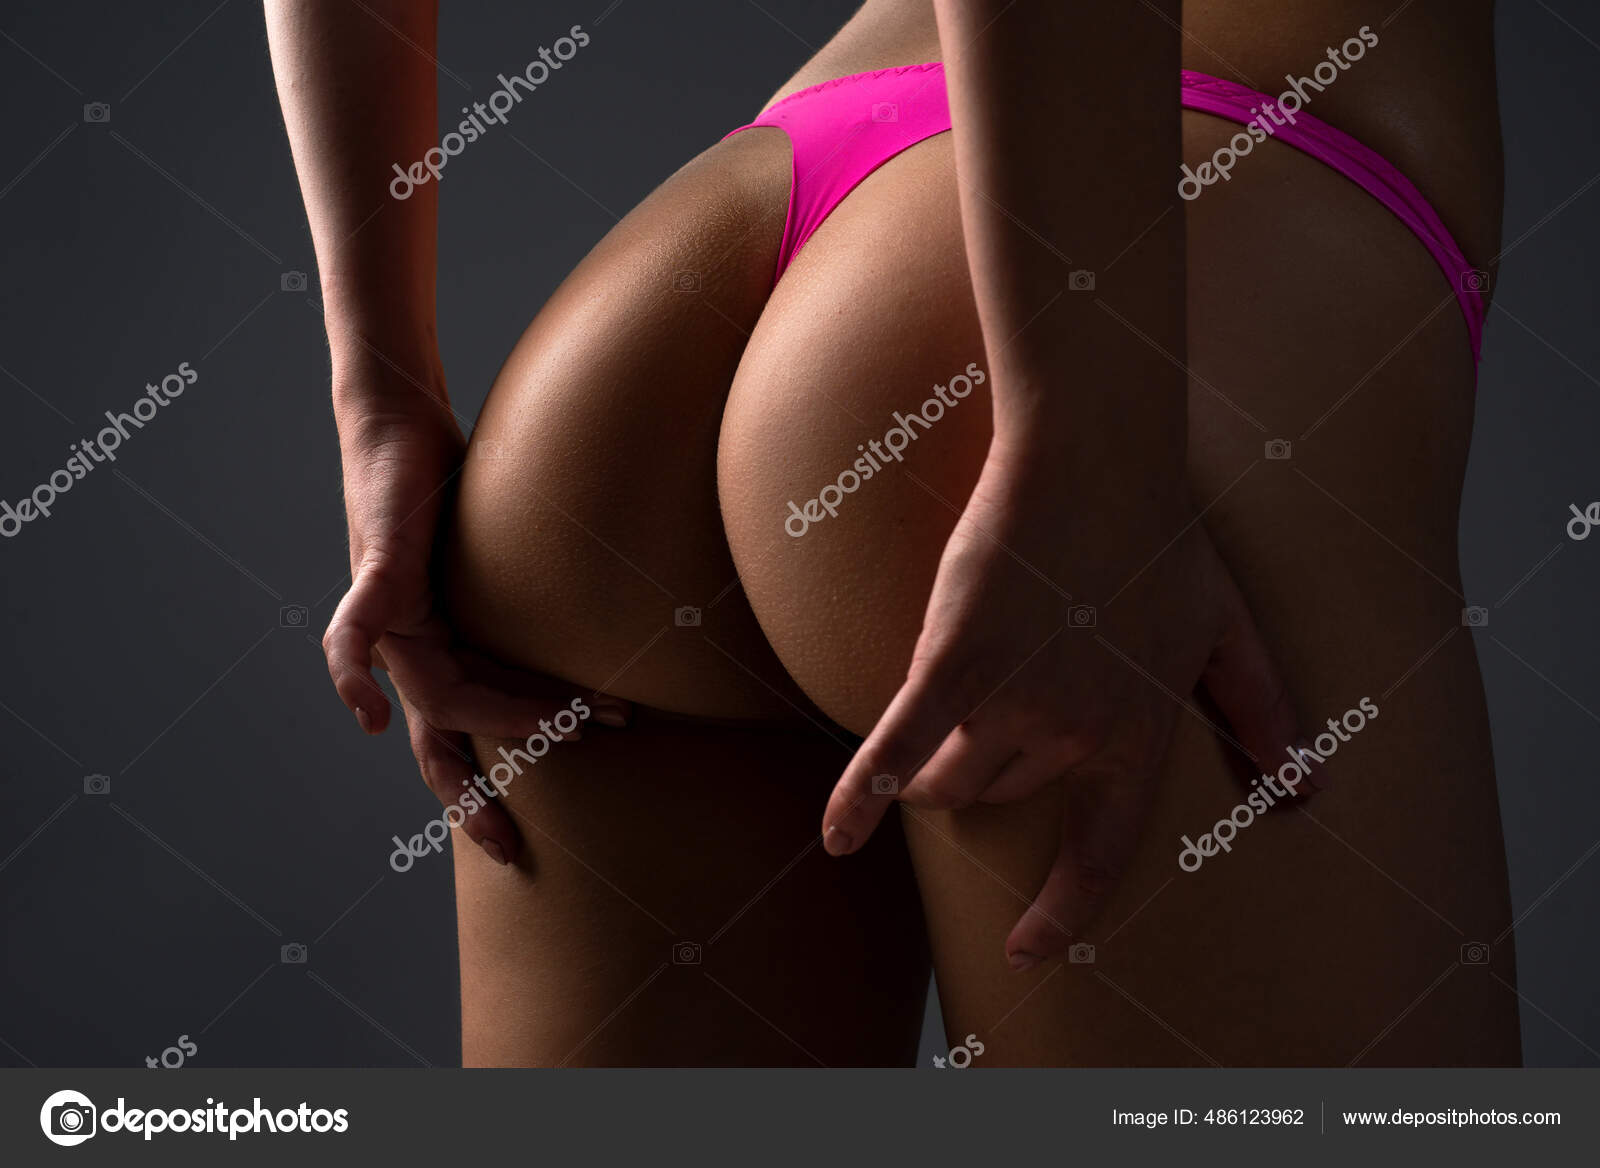 Sexy female ass in panties. Sexy curves girl butt without cellulite. Beautiful slim body. Luxury ass. Huge buttocks, night club background pic